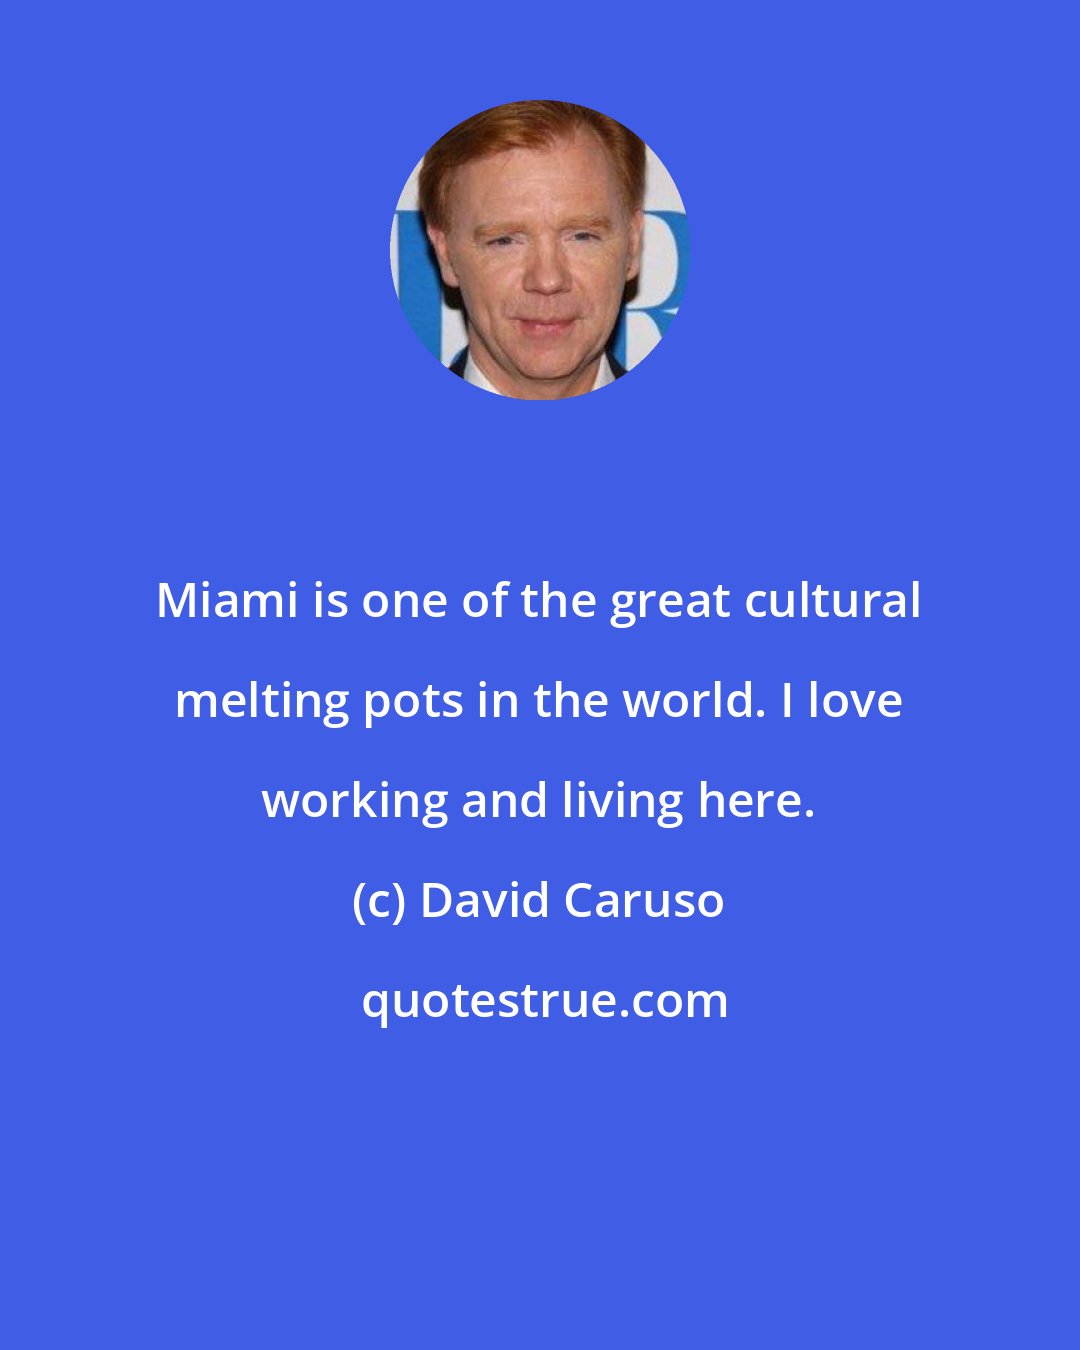 David Caruso: Miami is one of the great cultural melting pots in the world. I love working and living here.